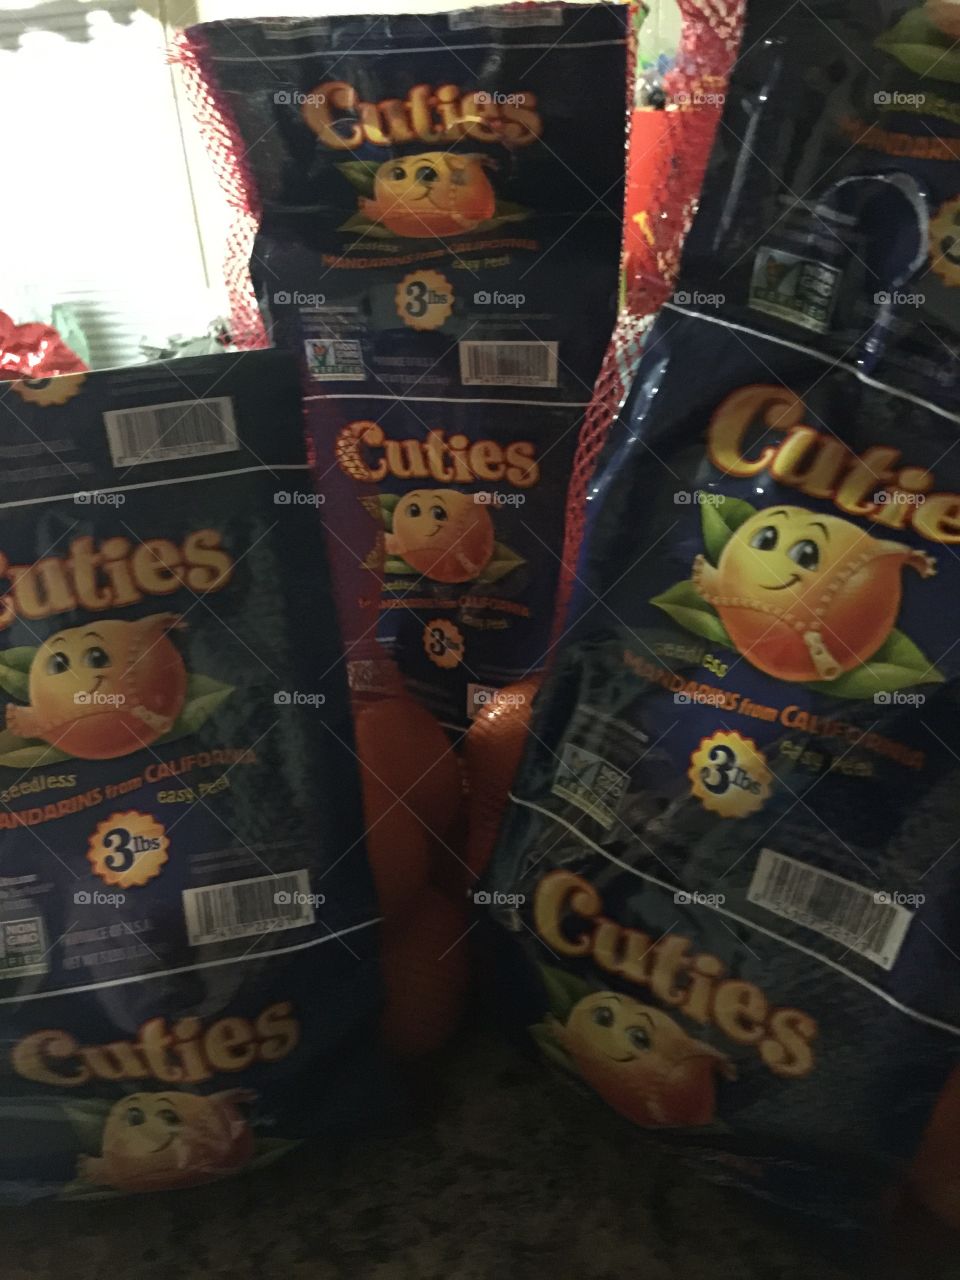 Love Cuties they taste just like candy but better for you 